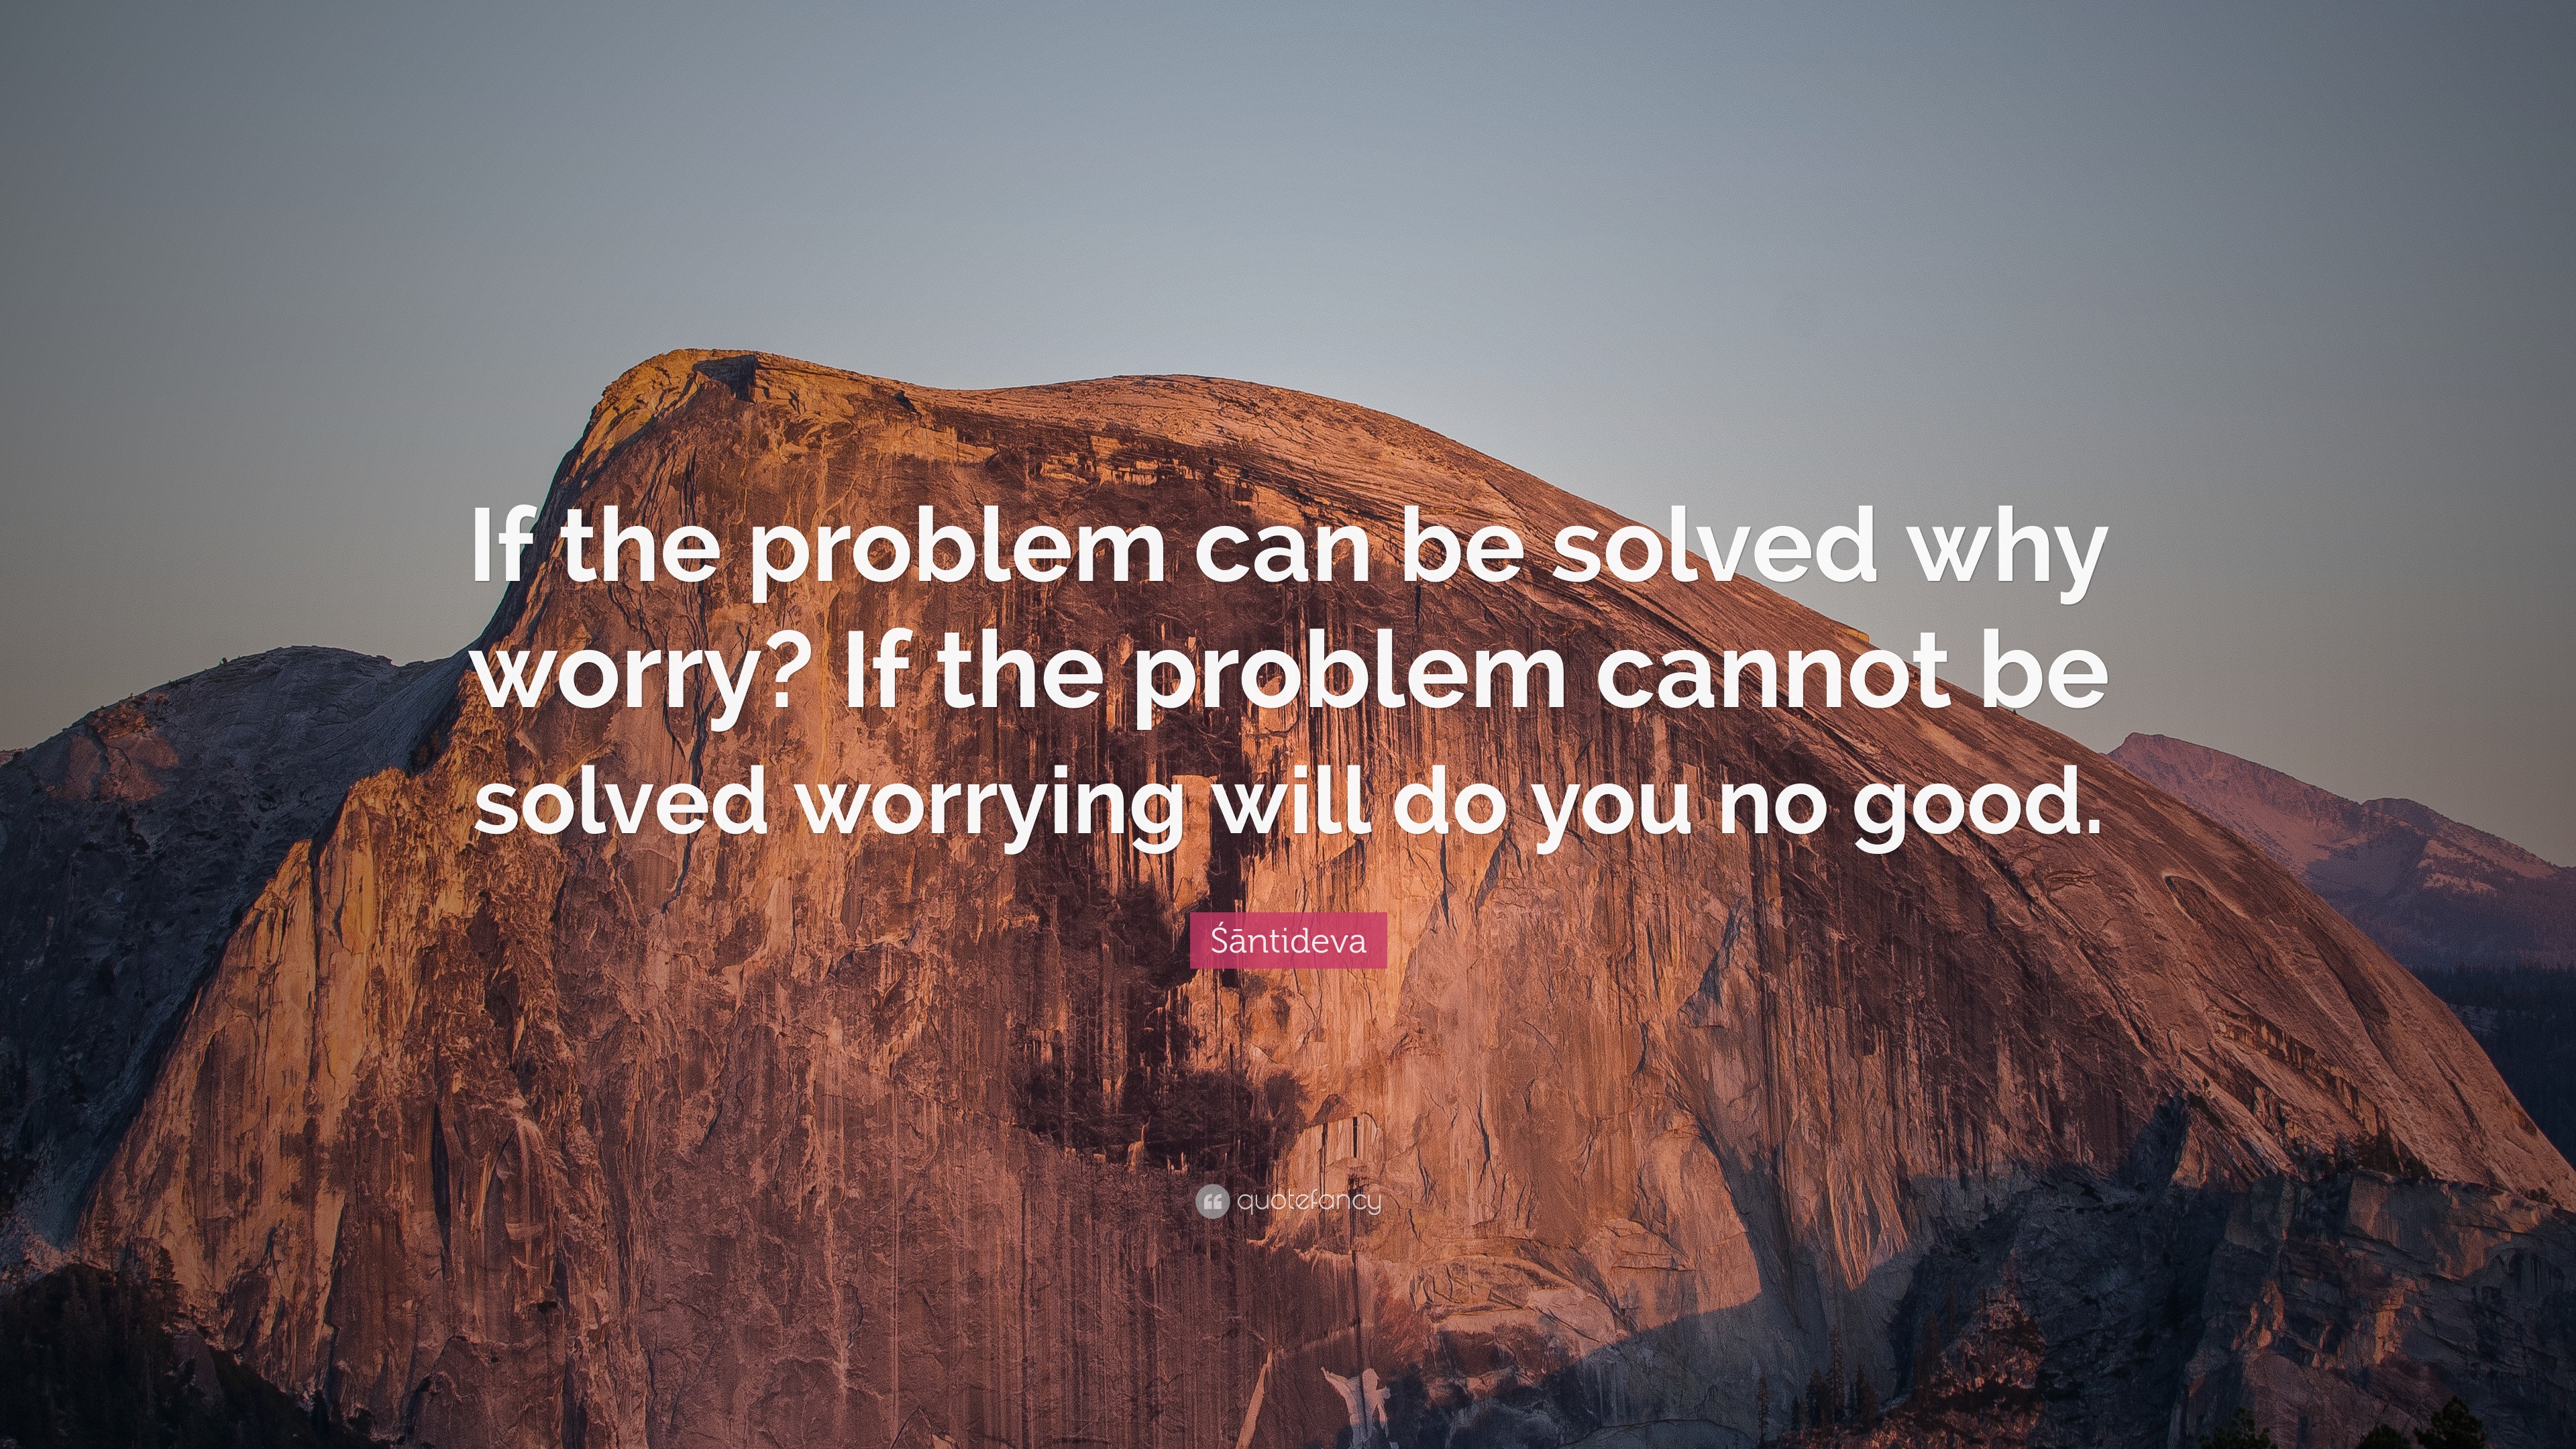 Śāntideva Quote: “If the problem can be solved why worry? If the